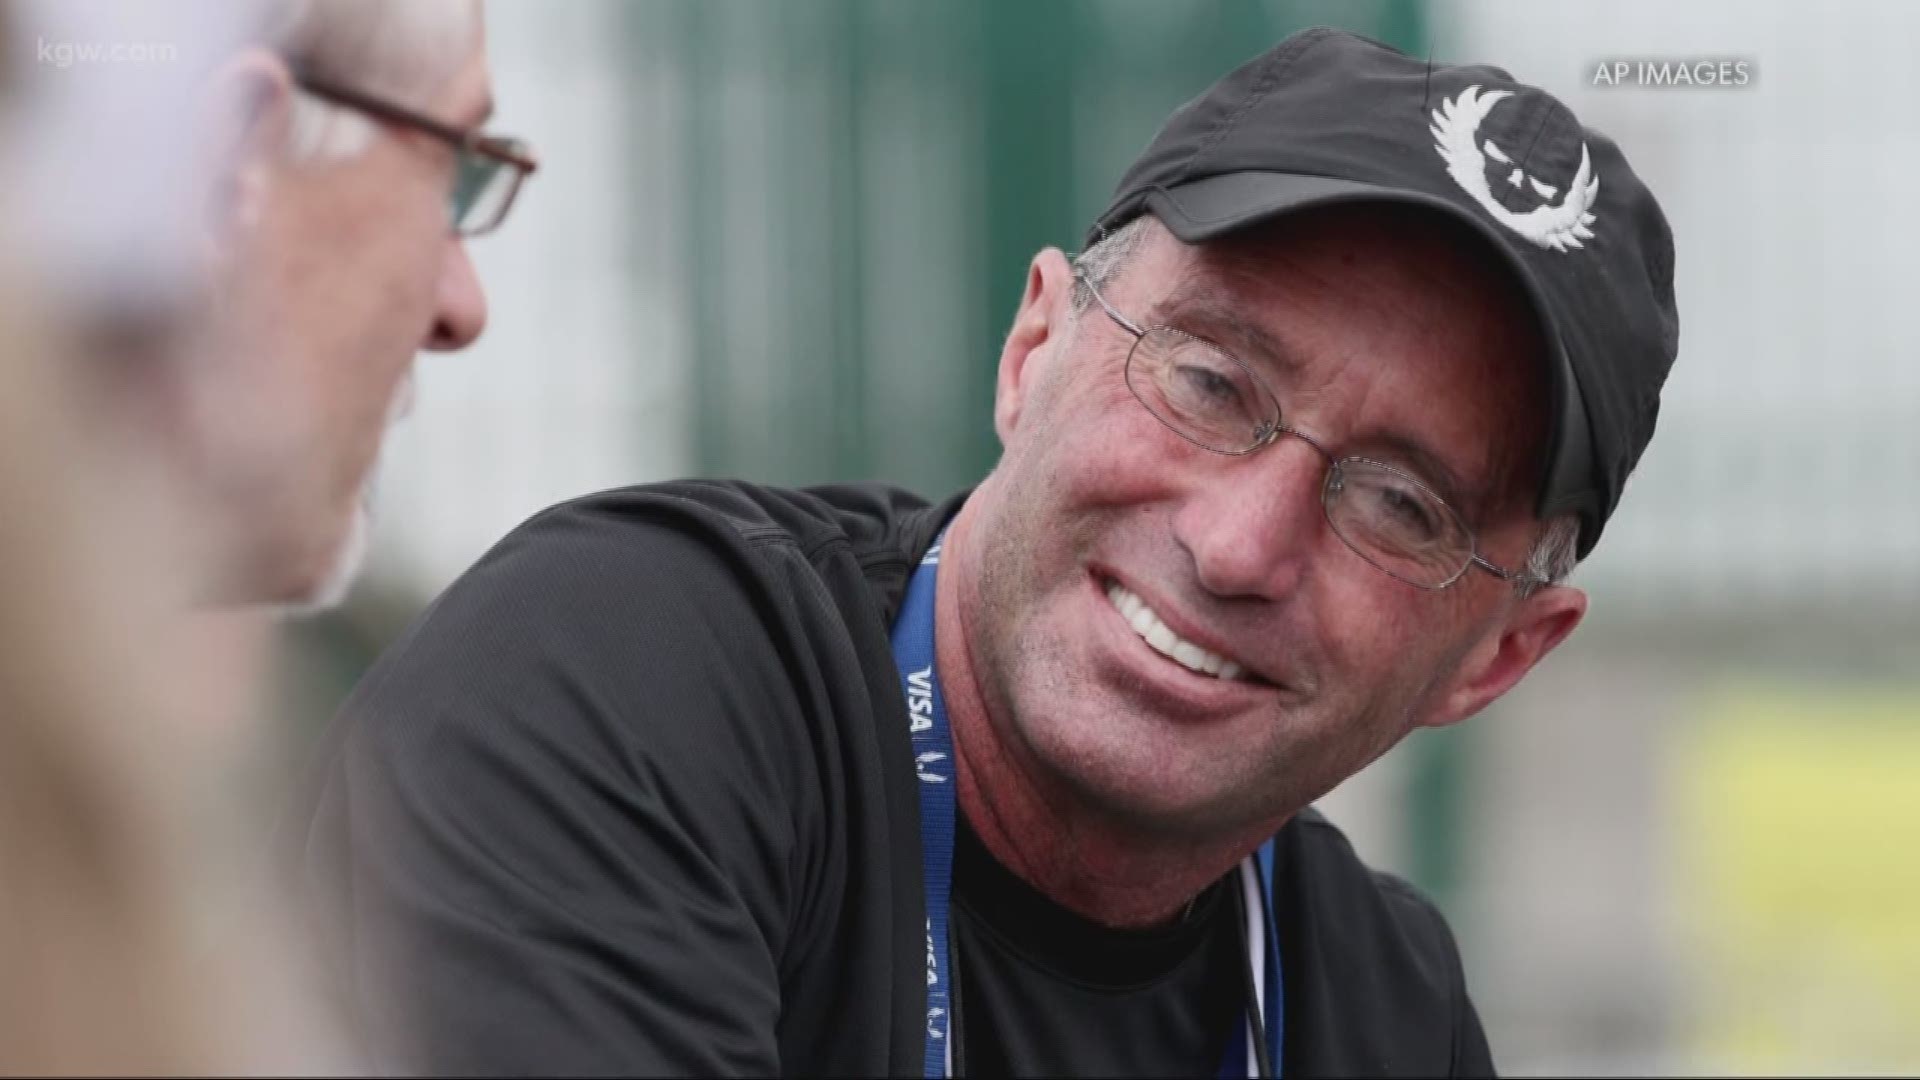 Alberto Salazar plans to appeal doping ban